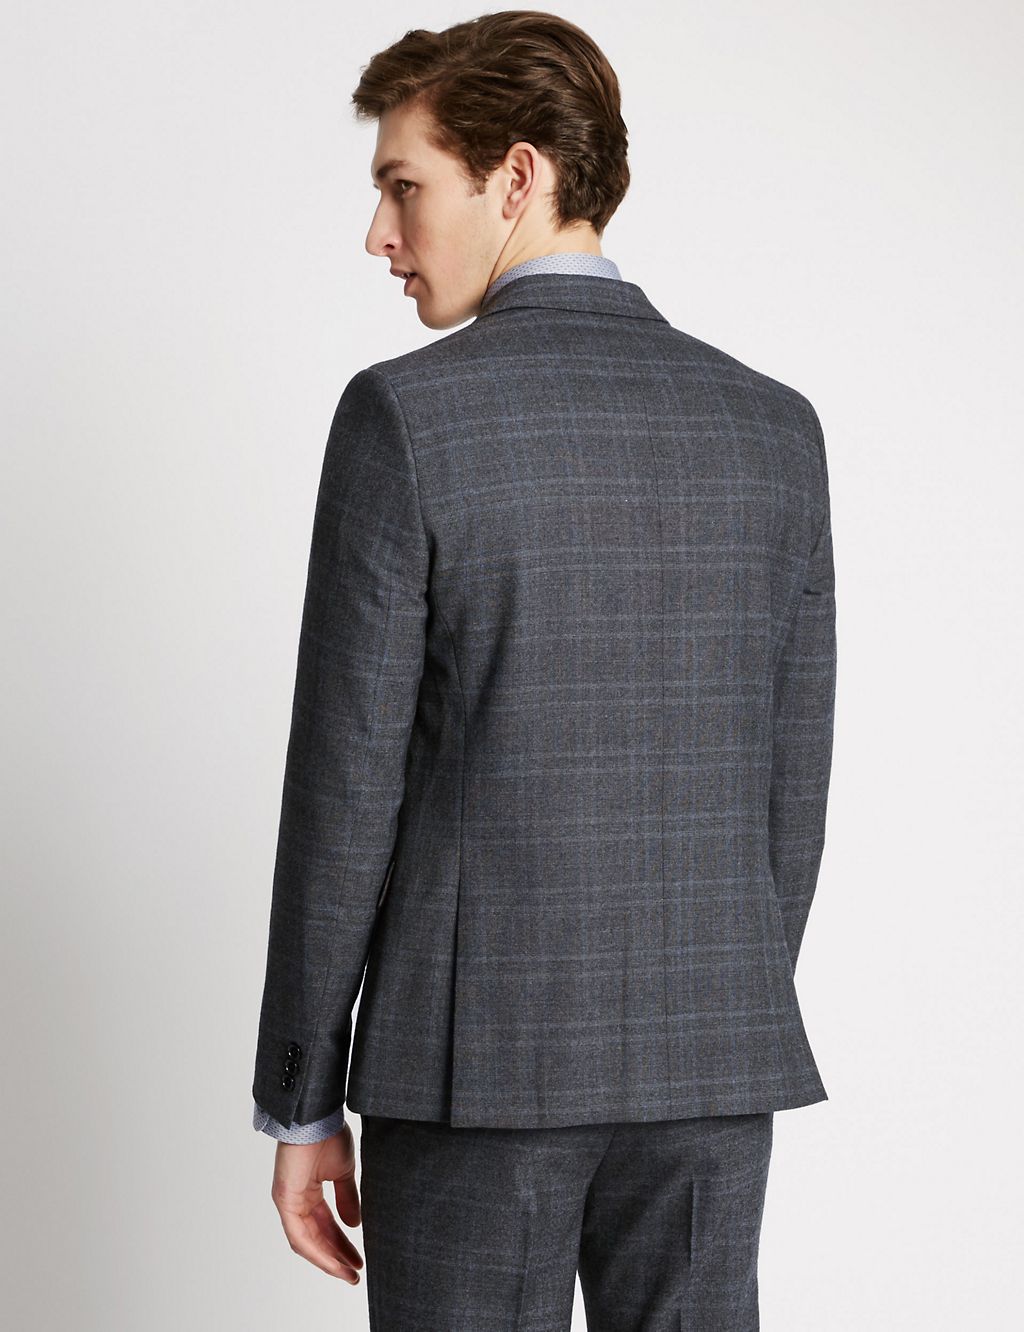 Grey Checked Modern Tailored Fit Jacket 6 of 7